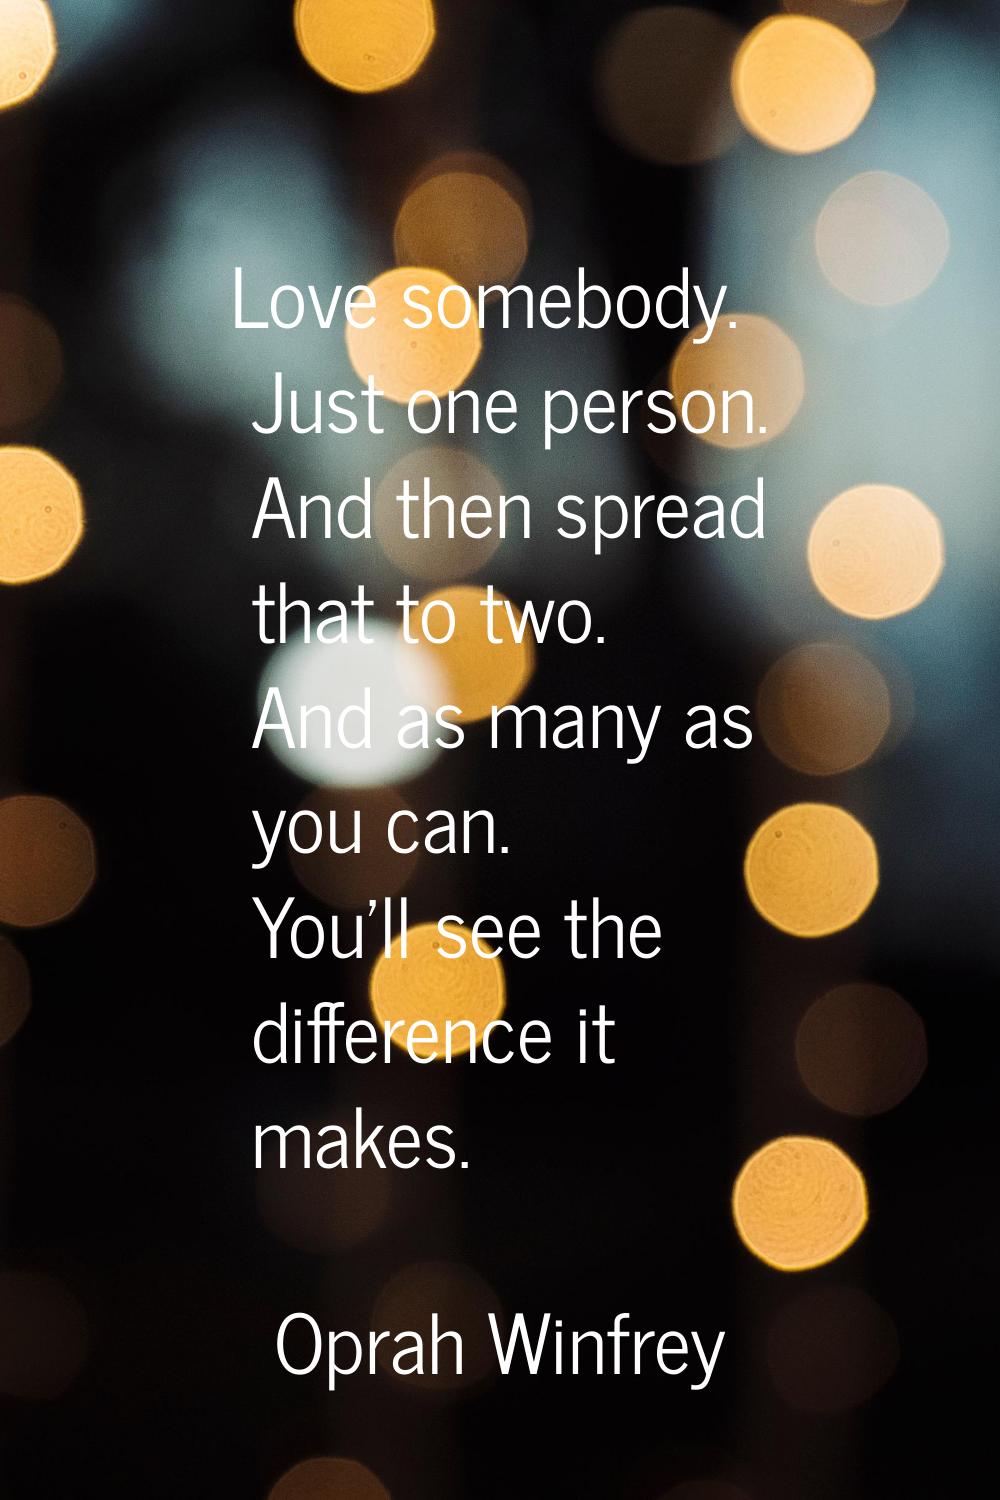 Love somebody. Just one person. And then spread that to two. And as many as you can. You'll see the